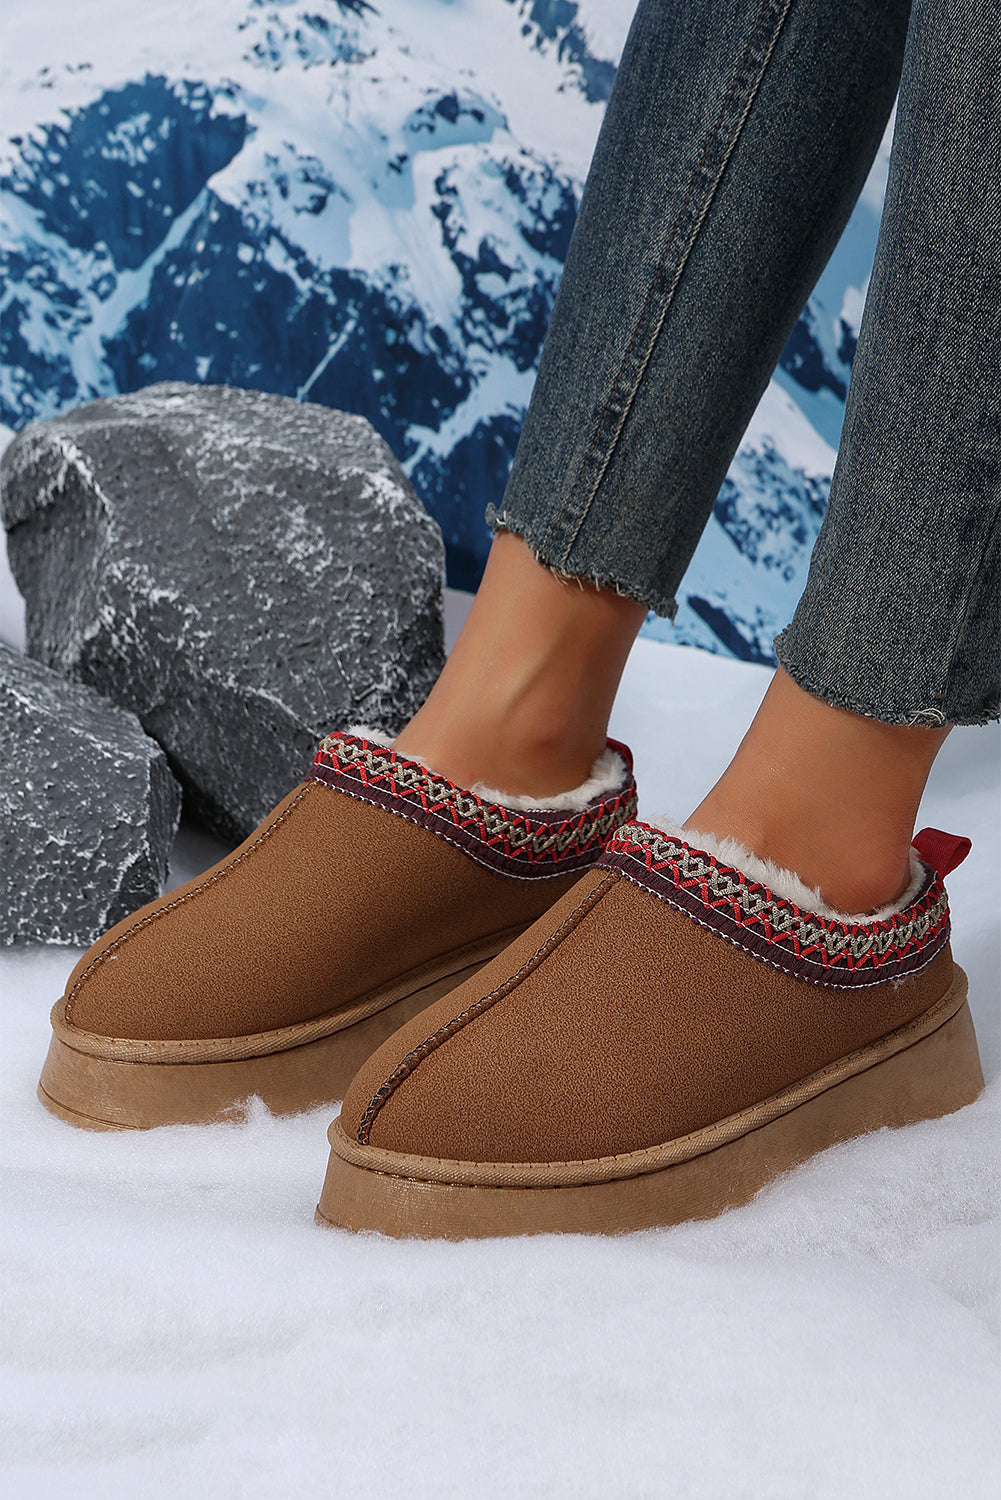 - Suede Contrast Print Plush Lined Snow Boots - womens boots at TFC&H Co.